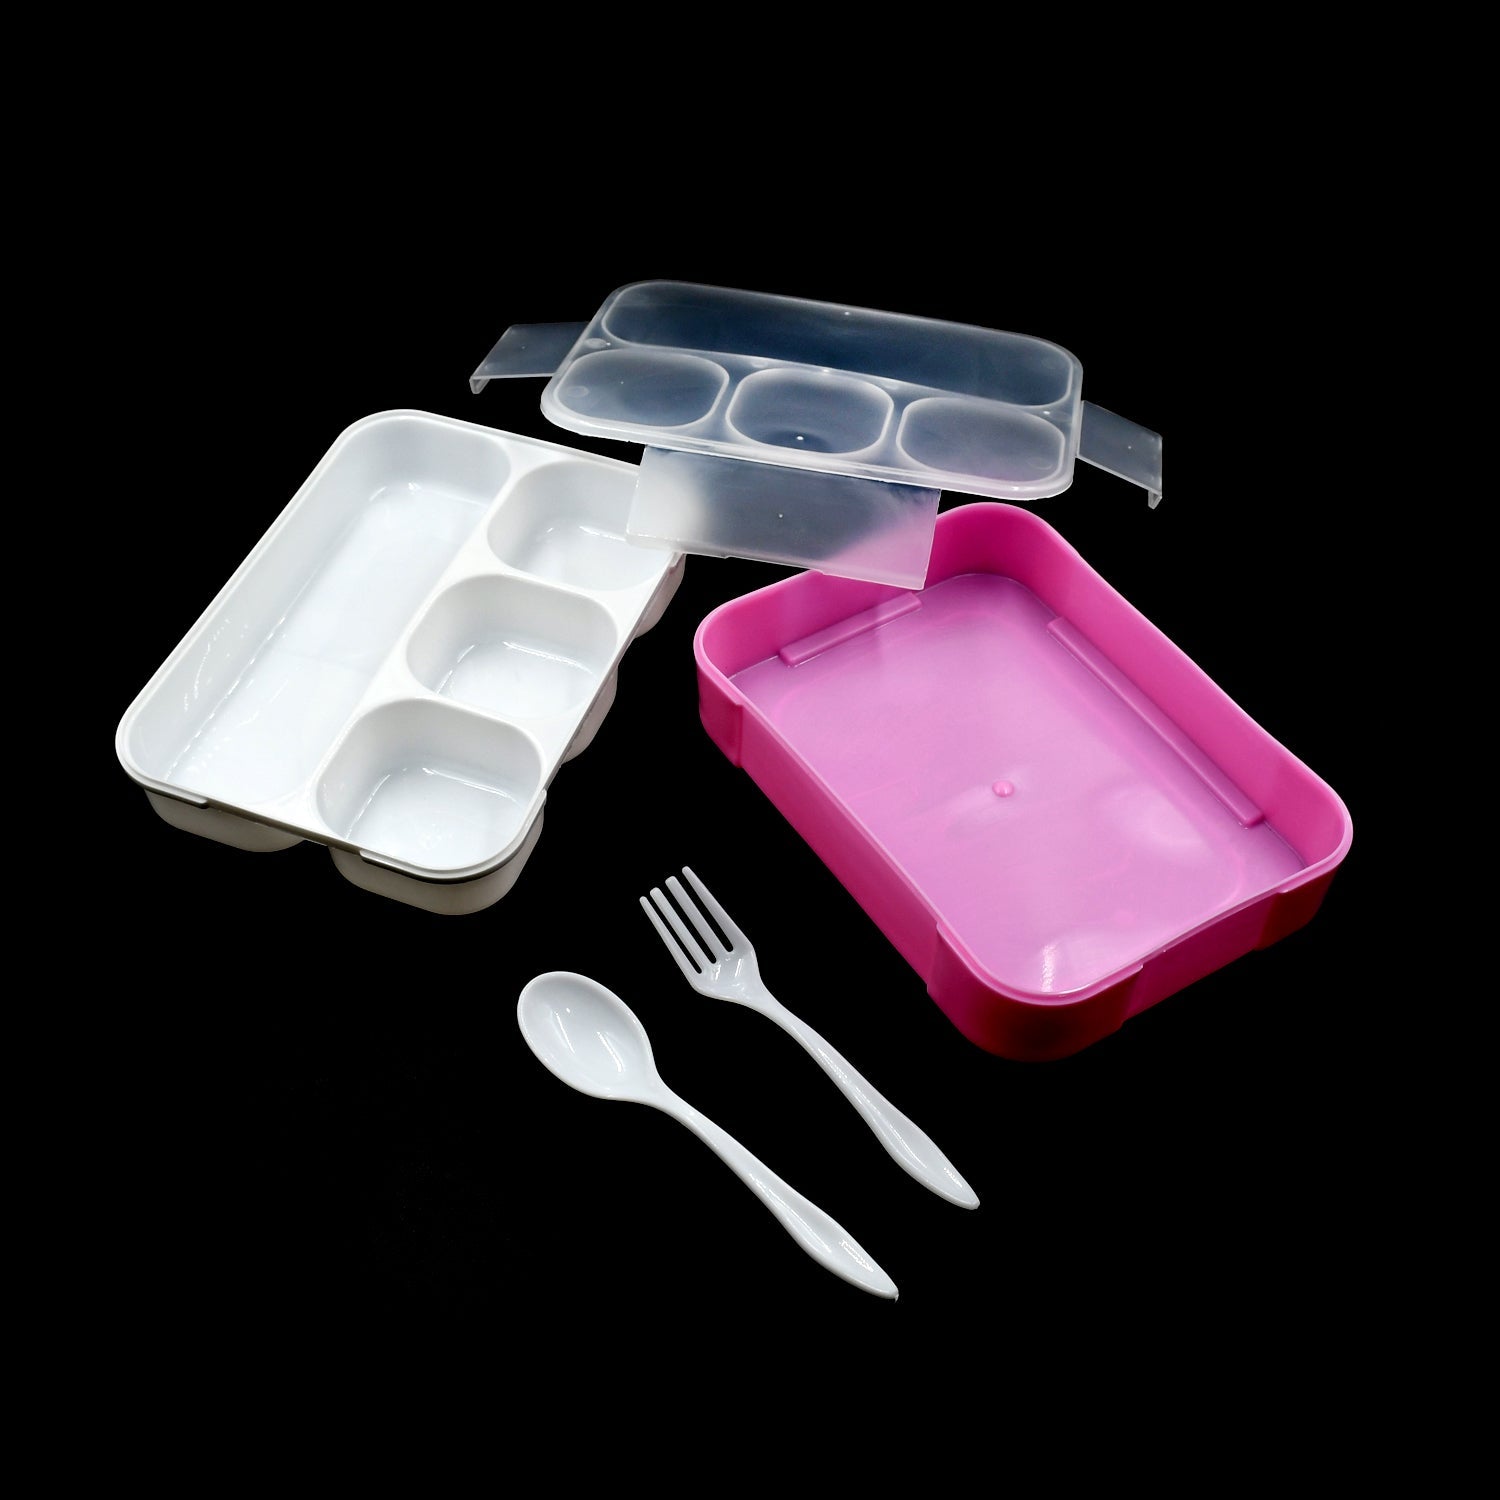 5956 Lunch Box 4 Compartment With Leak Proof Lunch Box & 2 spoon, For School & Office Use